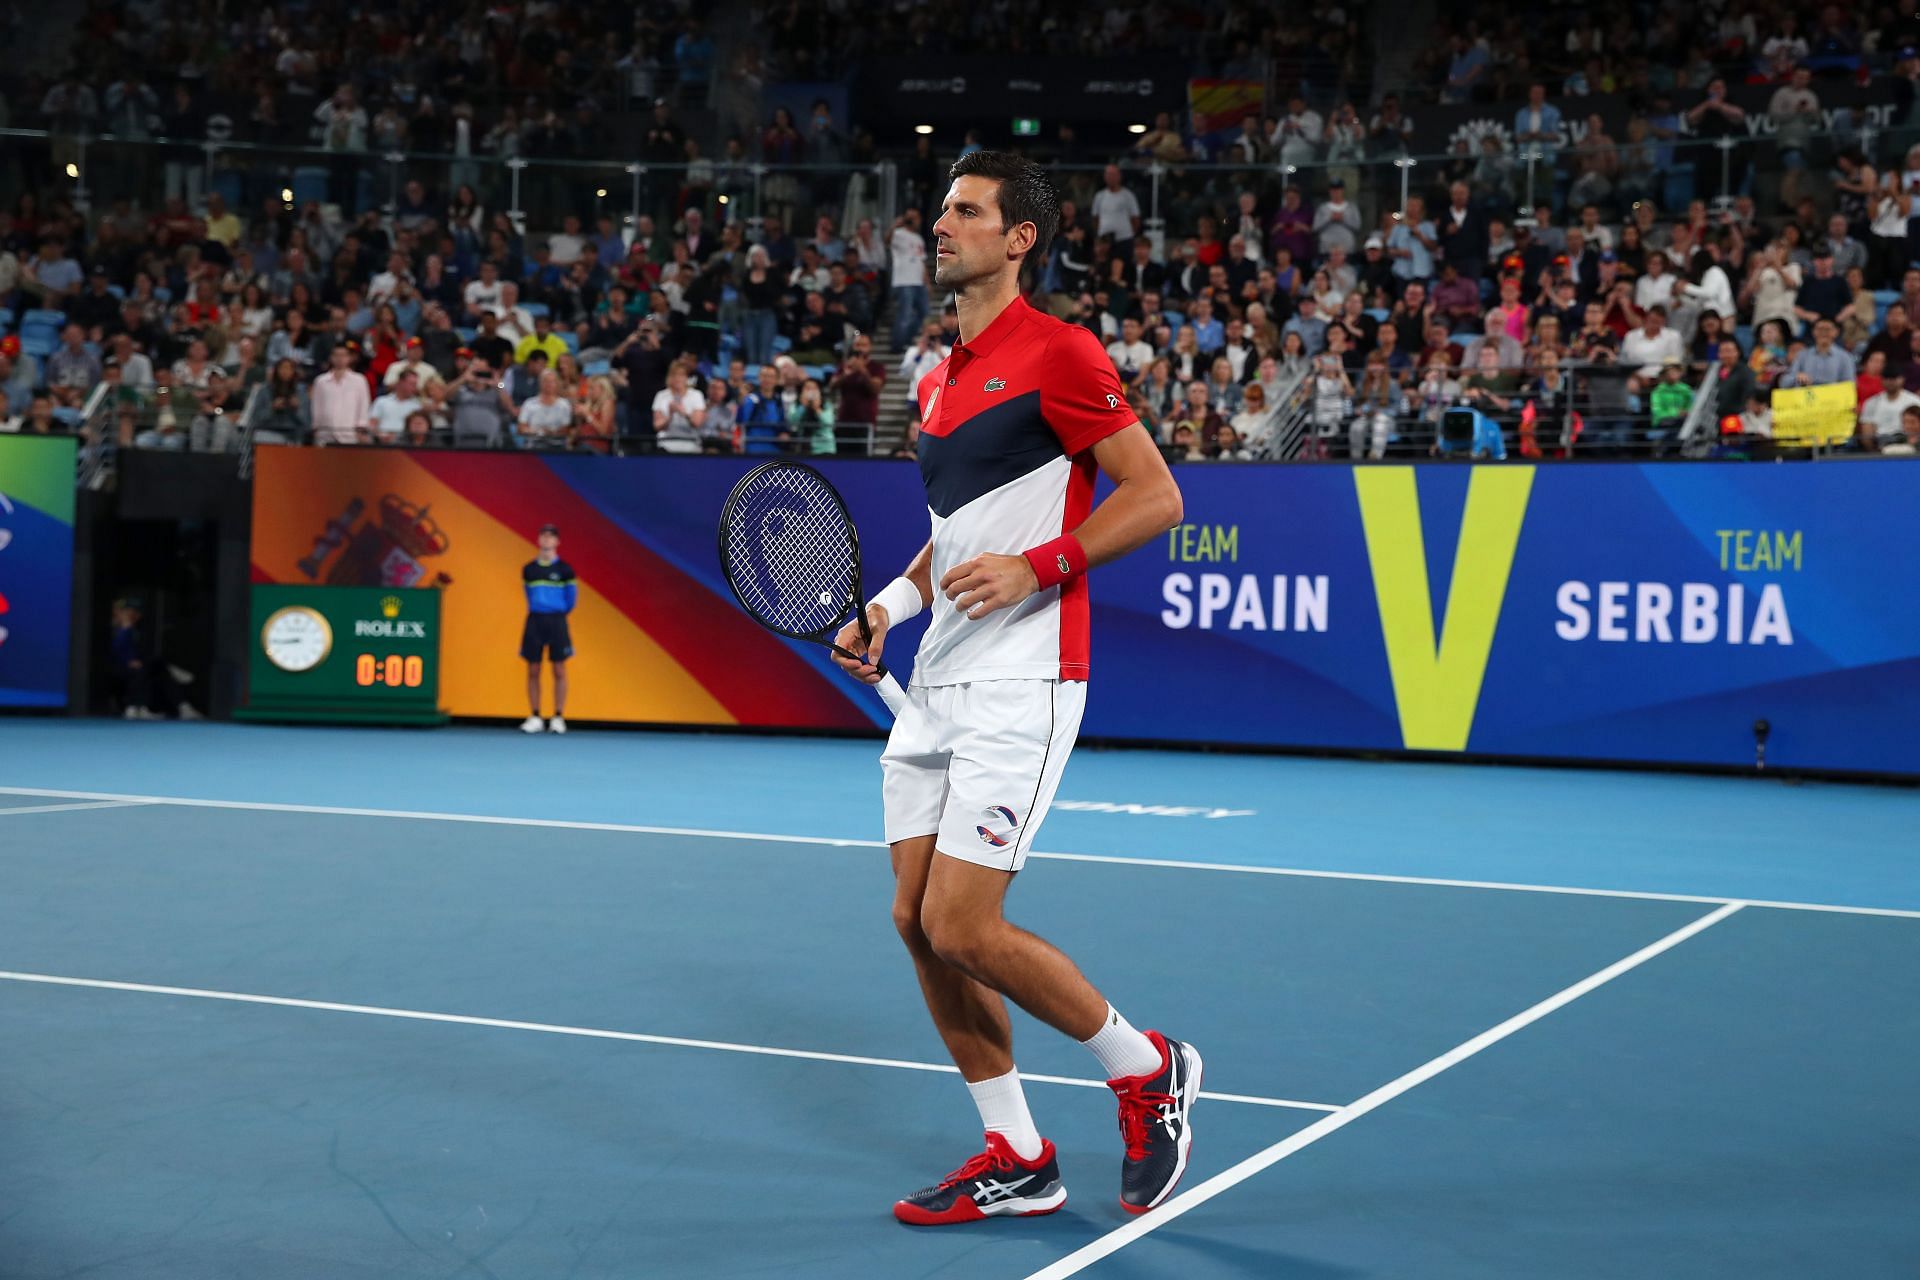 Recent reports have surfaced that suggest Novak Djokovic might not play at the 2022 ATP Cup